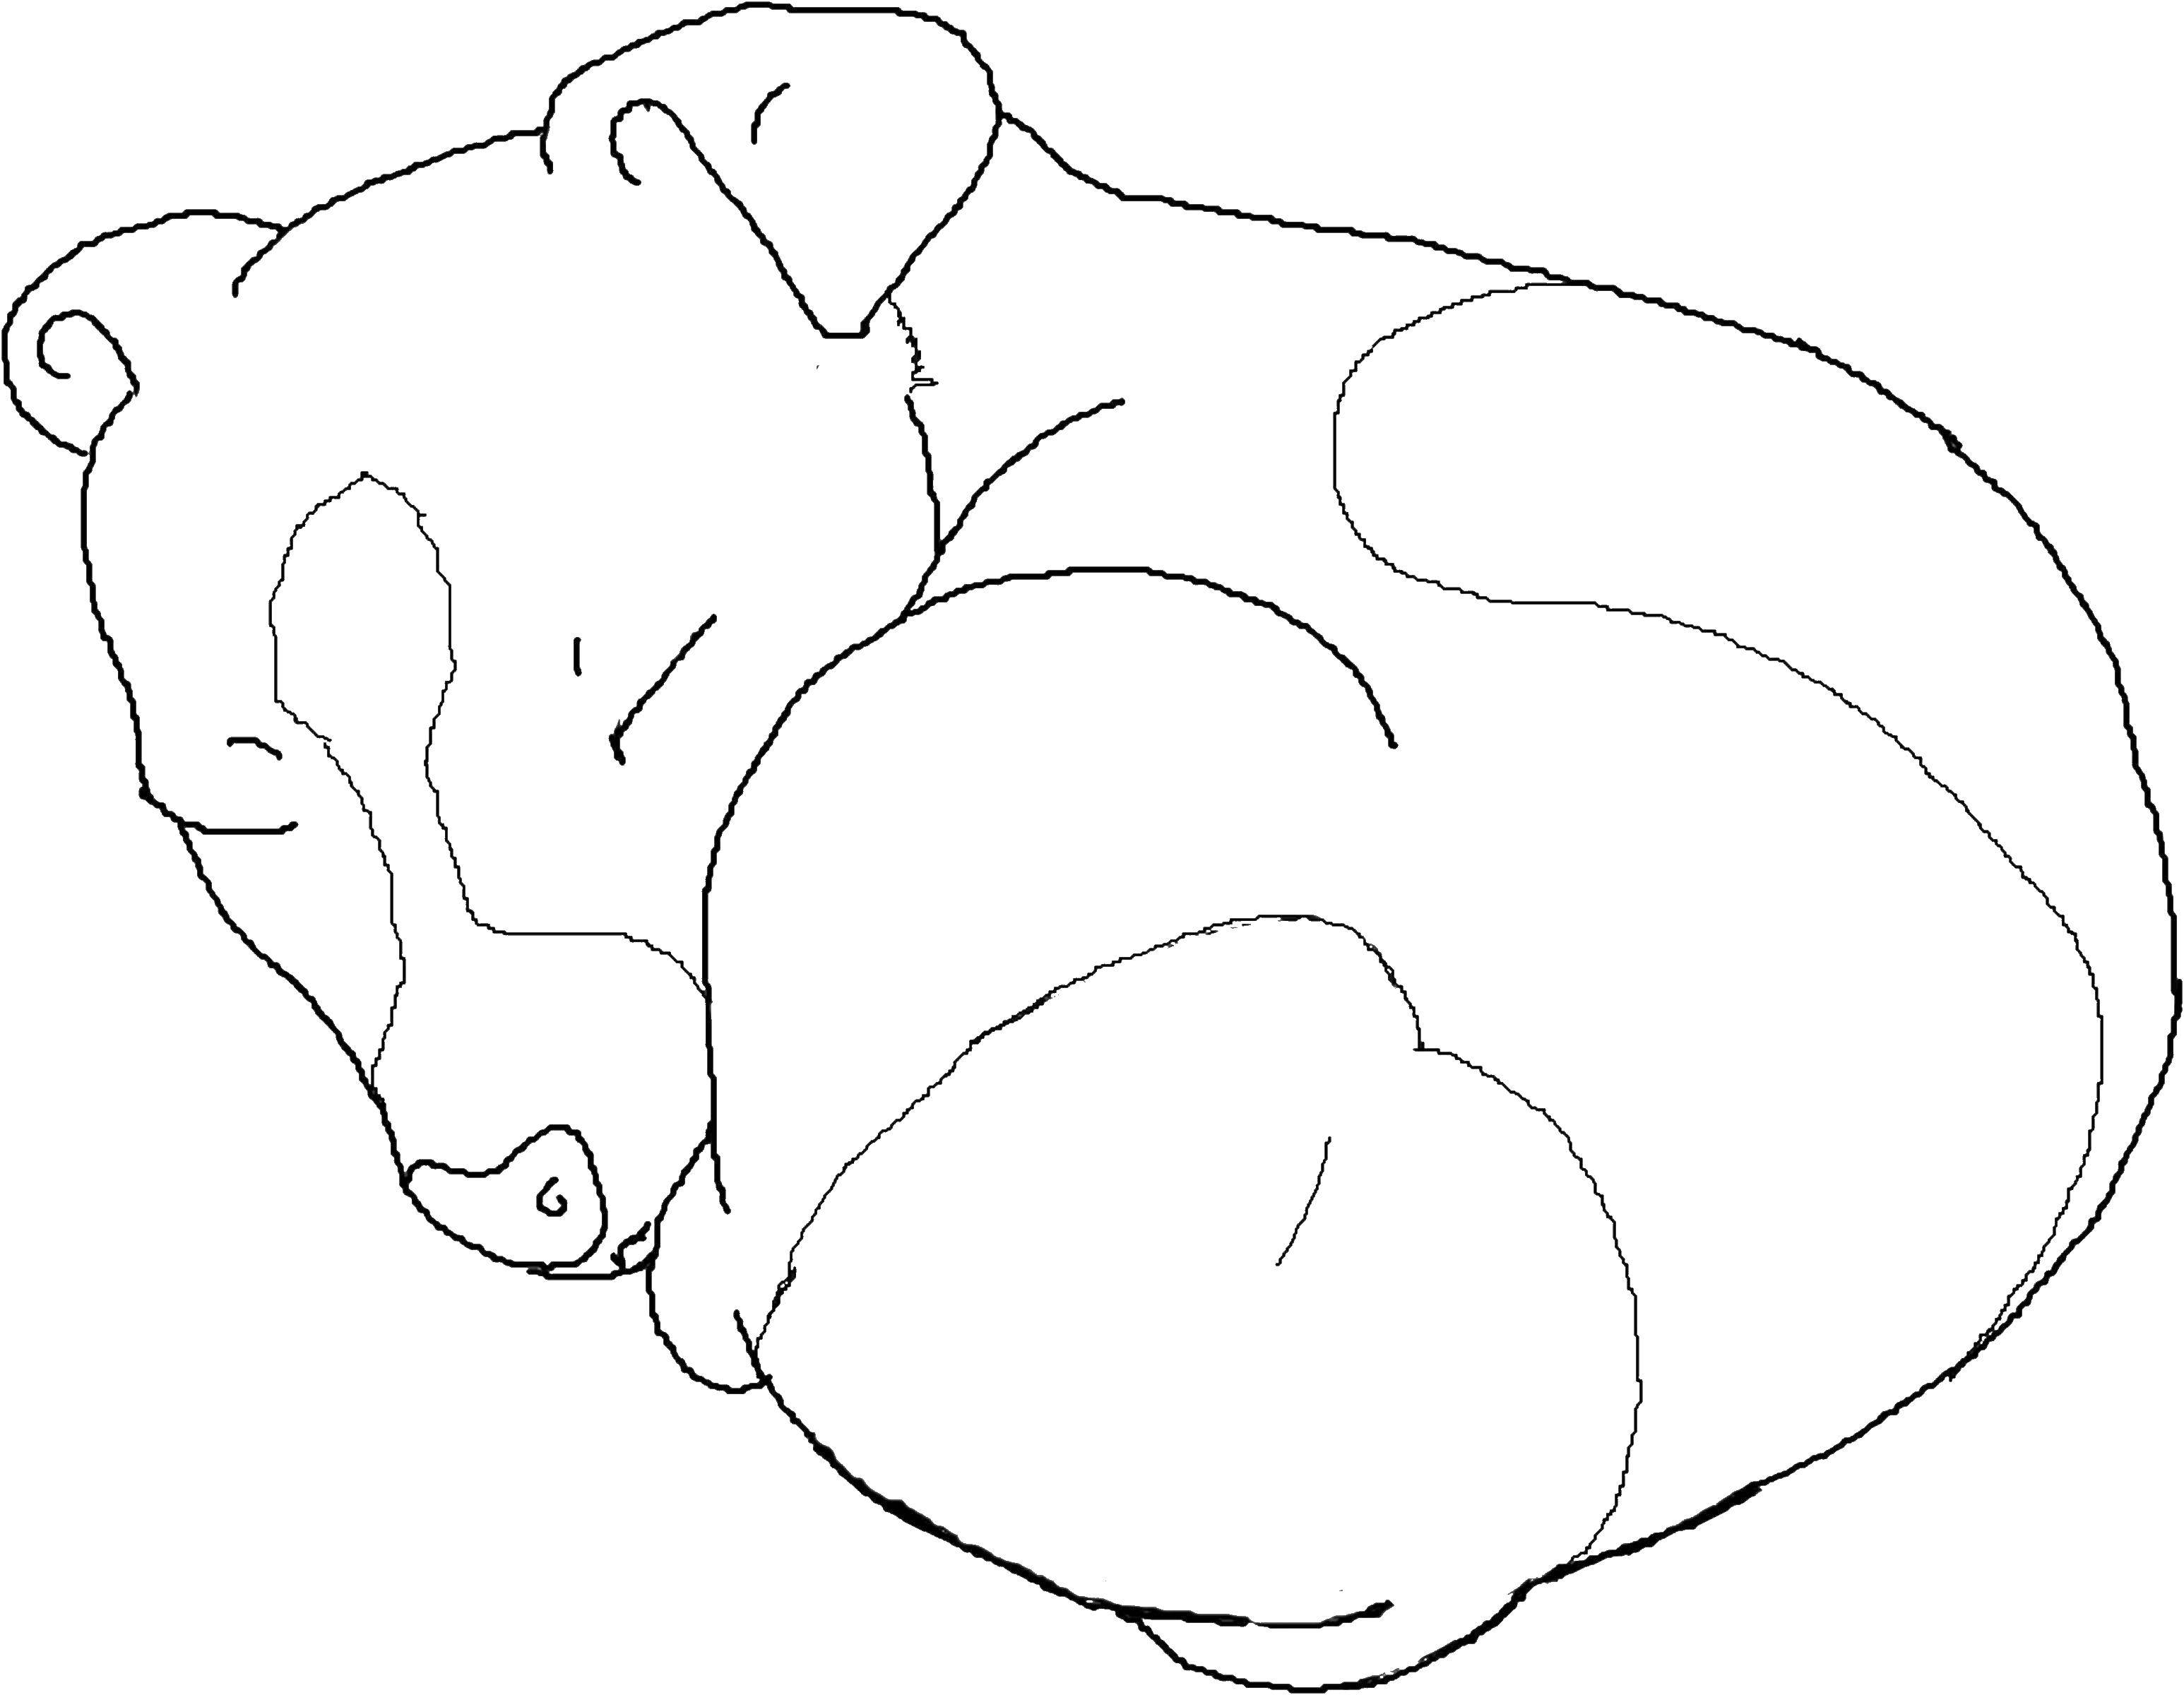 Coloring The dog is sleeping. Category Pets allowed. Tags:  dog, sleep.